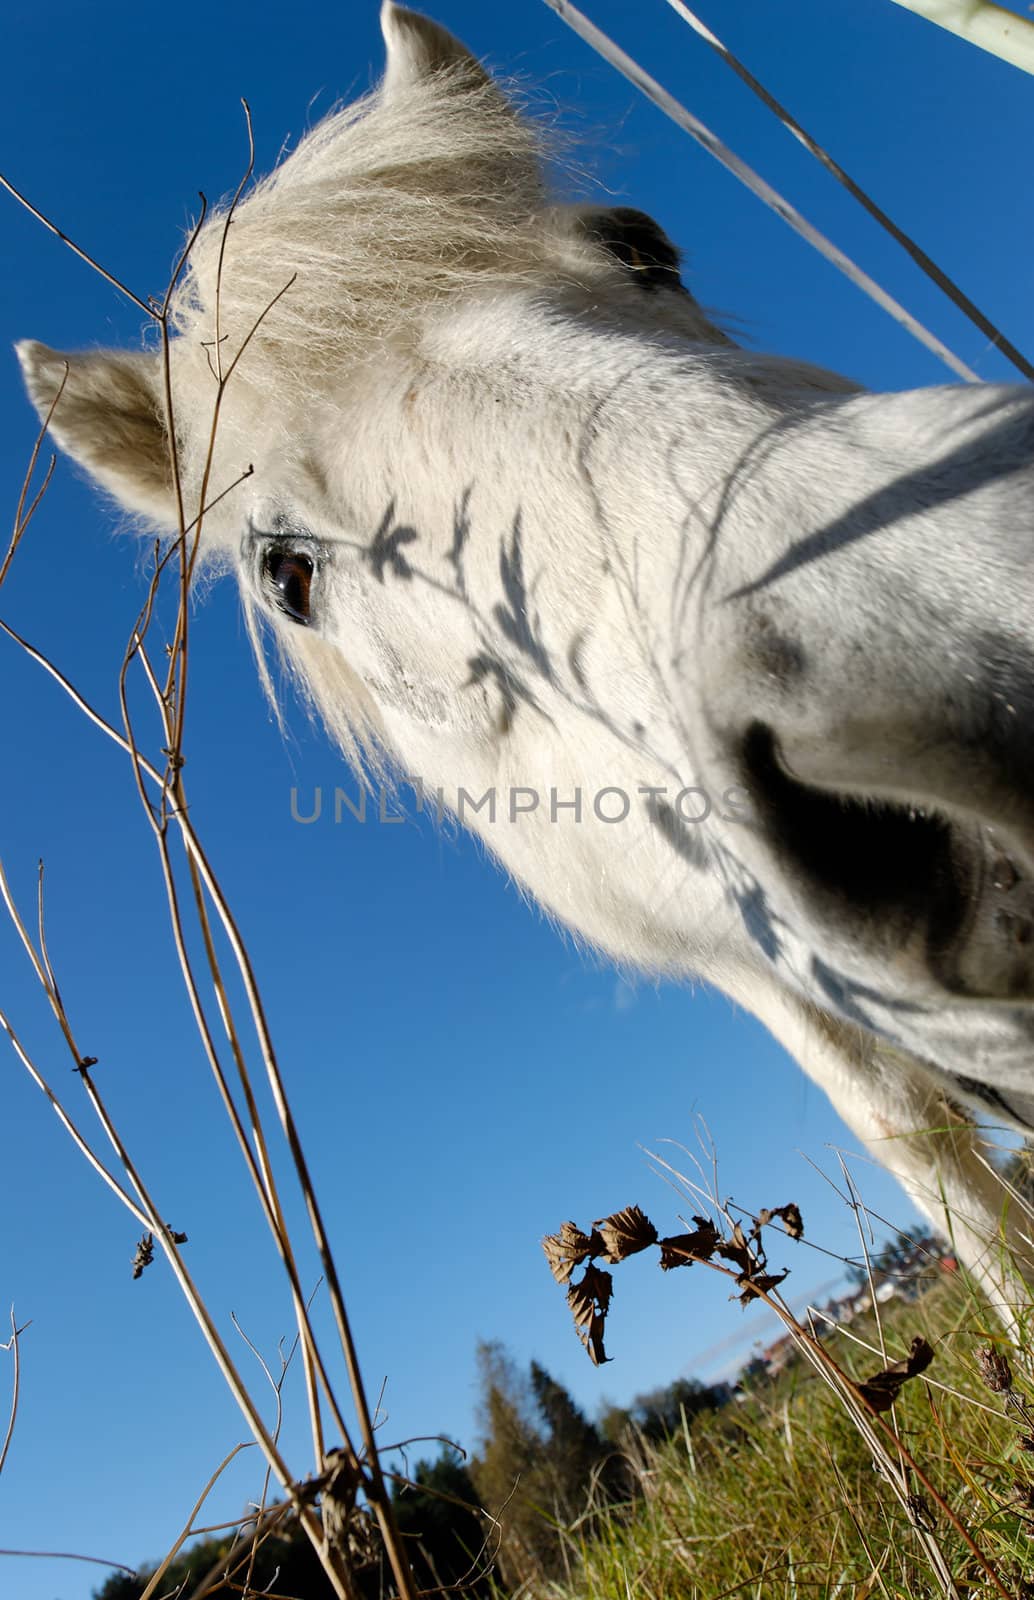 A wide-angle shot of a horse's snout from below. The focus is on the eye.
